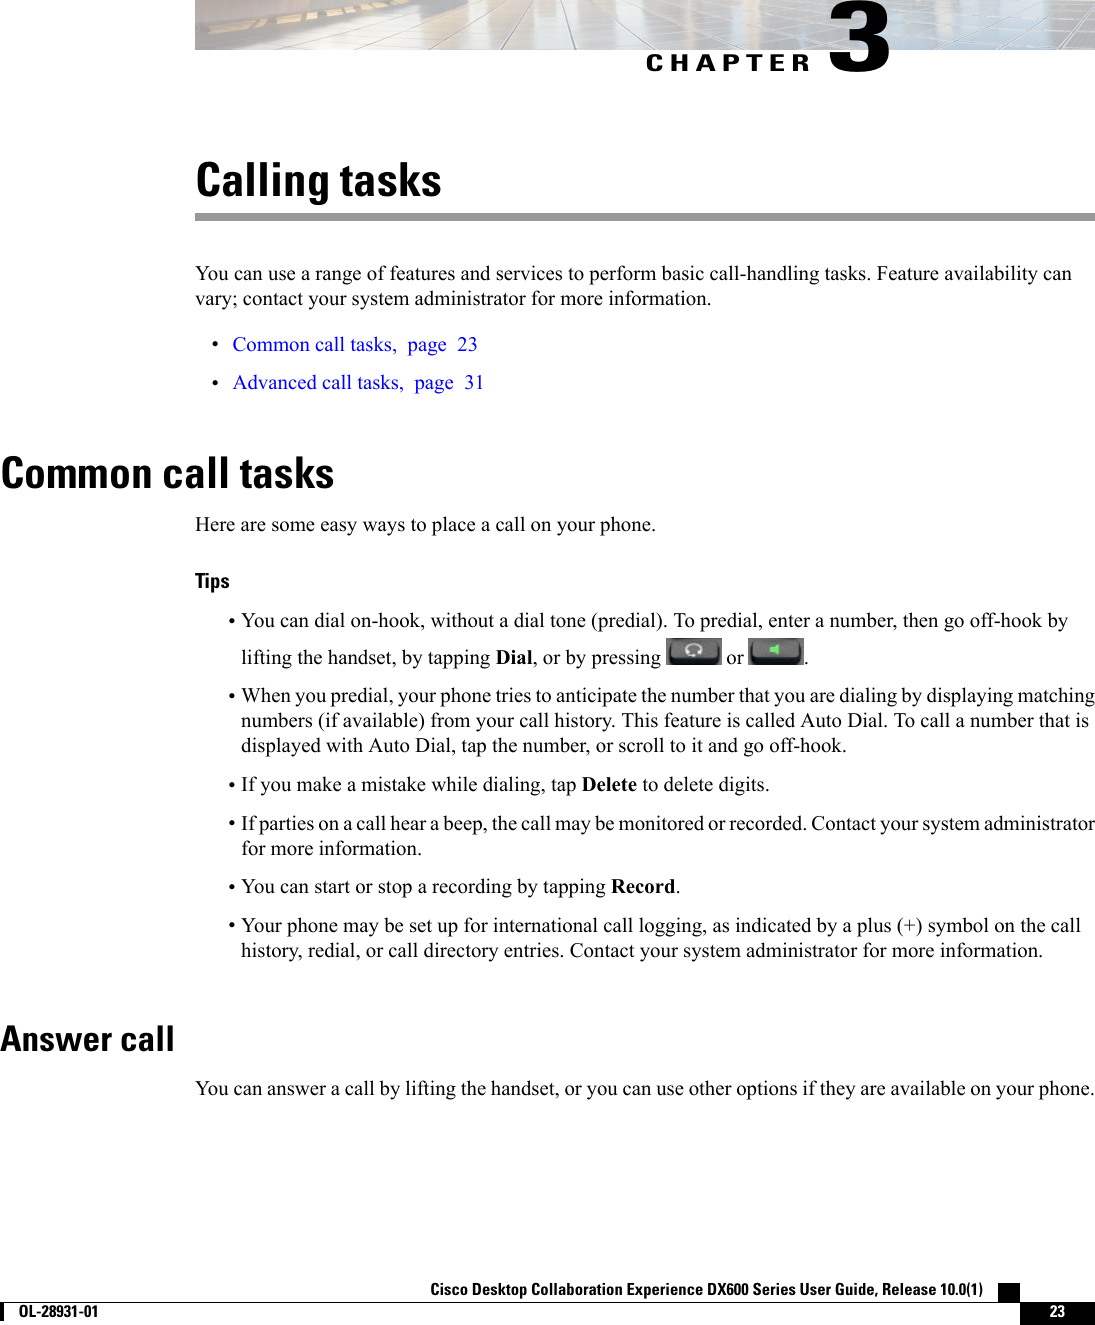 CHAPTER 3Calling tasksYou can use a range of features and services to perform basic call-handling tasks. Feature availability canvary; contact your system administrator for more information.•Common call tasks, page 23•Advanced call tasks, page 31Common call tasksHere are some easy ways to place a call on your phone.Tips•You can dial on-hook, without a dial tone (predial). To predial, enter a number, then go off-hook bylifting the handset, by tapping Dial, or by pressing or .•When you predial, your phone tries to anticipate the number that you are dialing by displaying matchingnumbers (if available) from your call history. This feature is called Auto Dial. To call a number that isdisplayed with Auto Dial, tap the number, or scroll to it and go off-hook.•If you make a mistake while dialing, tap Delete to delete digits.•If parties on a call hear a beep, the call may be monitored or recorded. Contact your system administratorfor more information.•You can start or stop a recording by tapping Record.•Your phone may be set up for international call logging, as indicated by a plus (+) symbol on the callhistory, redial, or call directory entries. Contact your system administrator for more information.Answer callYou can answer a call by lifting the handset, or you can use other options if they are available on your phone.Cisco Desktop Collaboration Experience DX600 Series User Guide, Release 10.0(1)        OL-28931-01 23